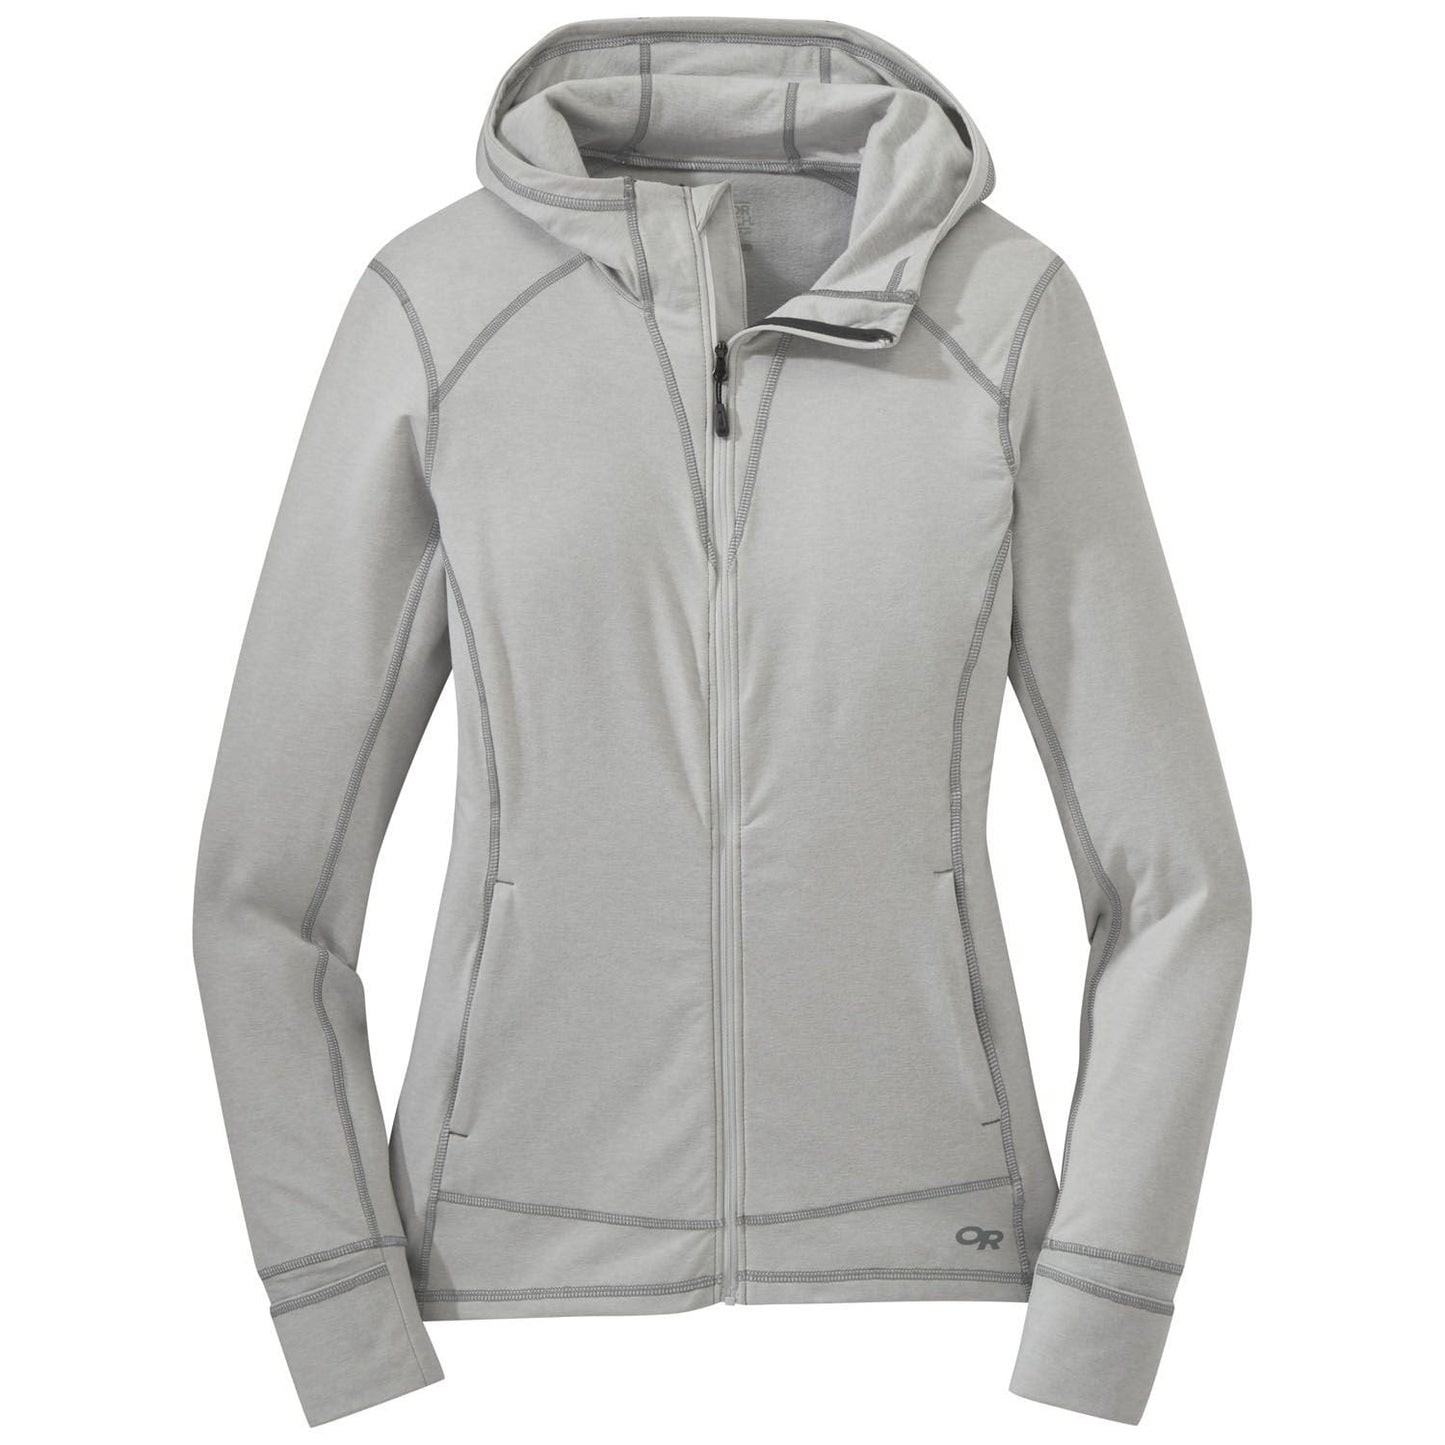 Outdoor Research - Women's Melody Hoody